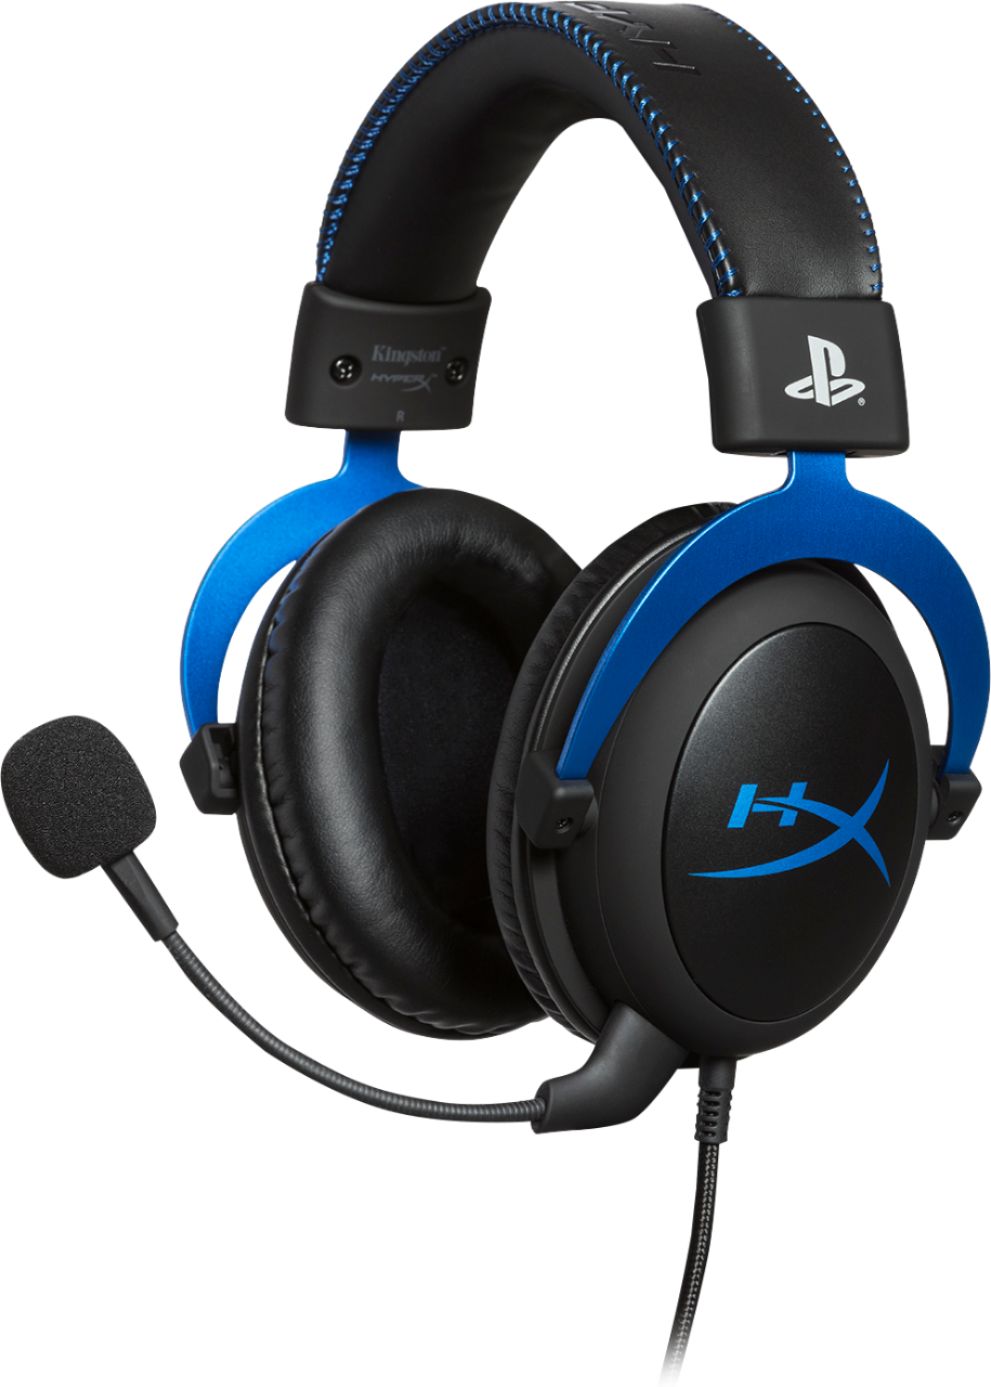 HyperX Cloud Wired Stereo Gaming Headset - Licencia oficial para PS4 y PS5 - Azul / Negro